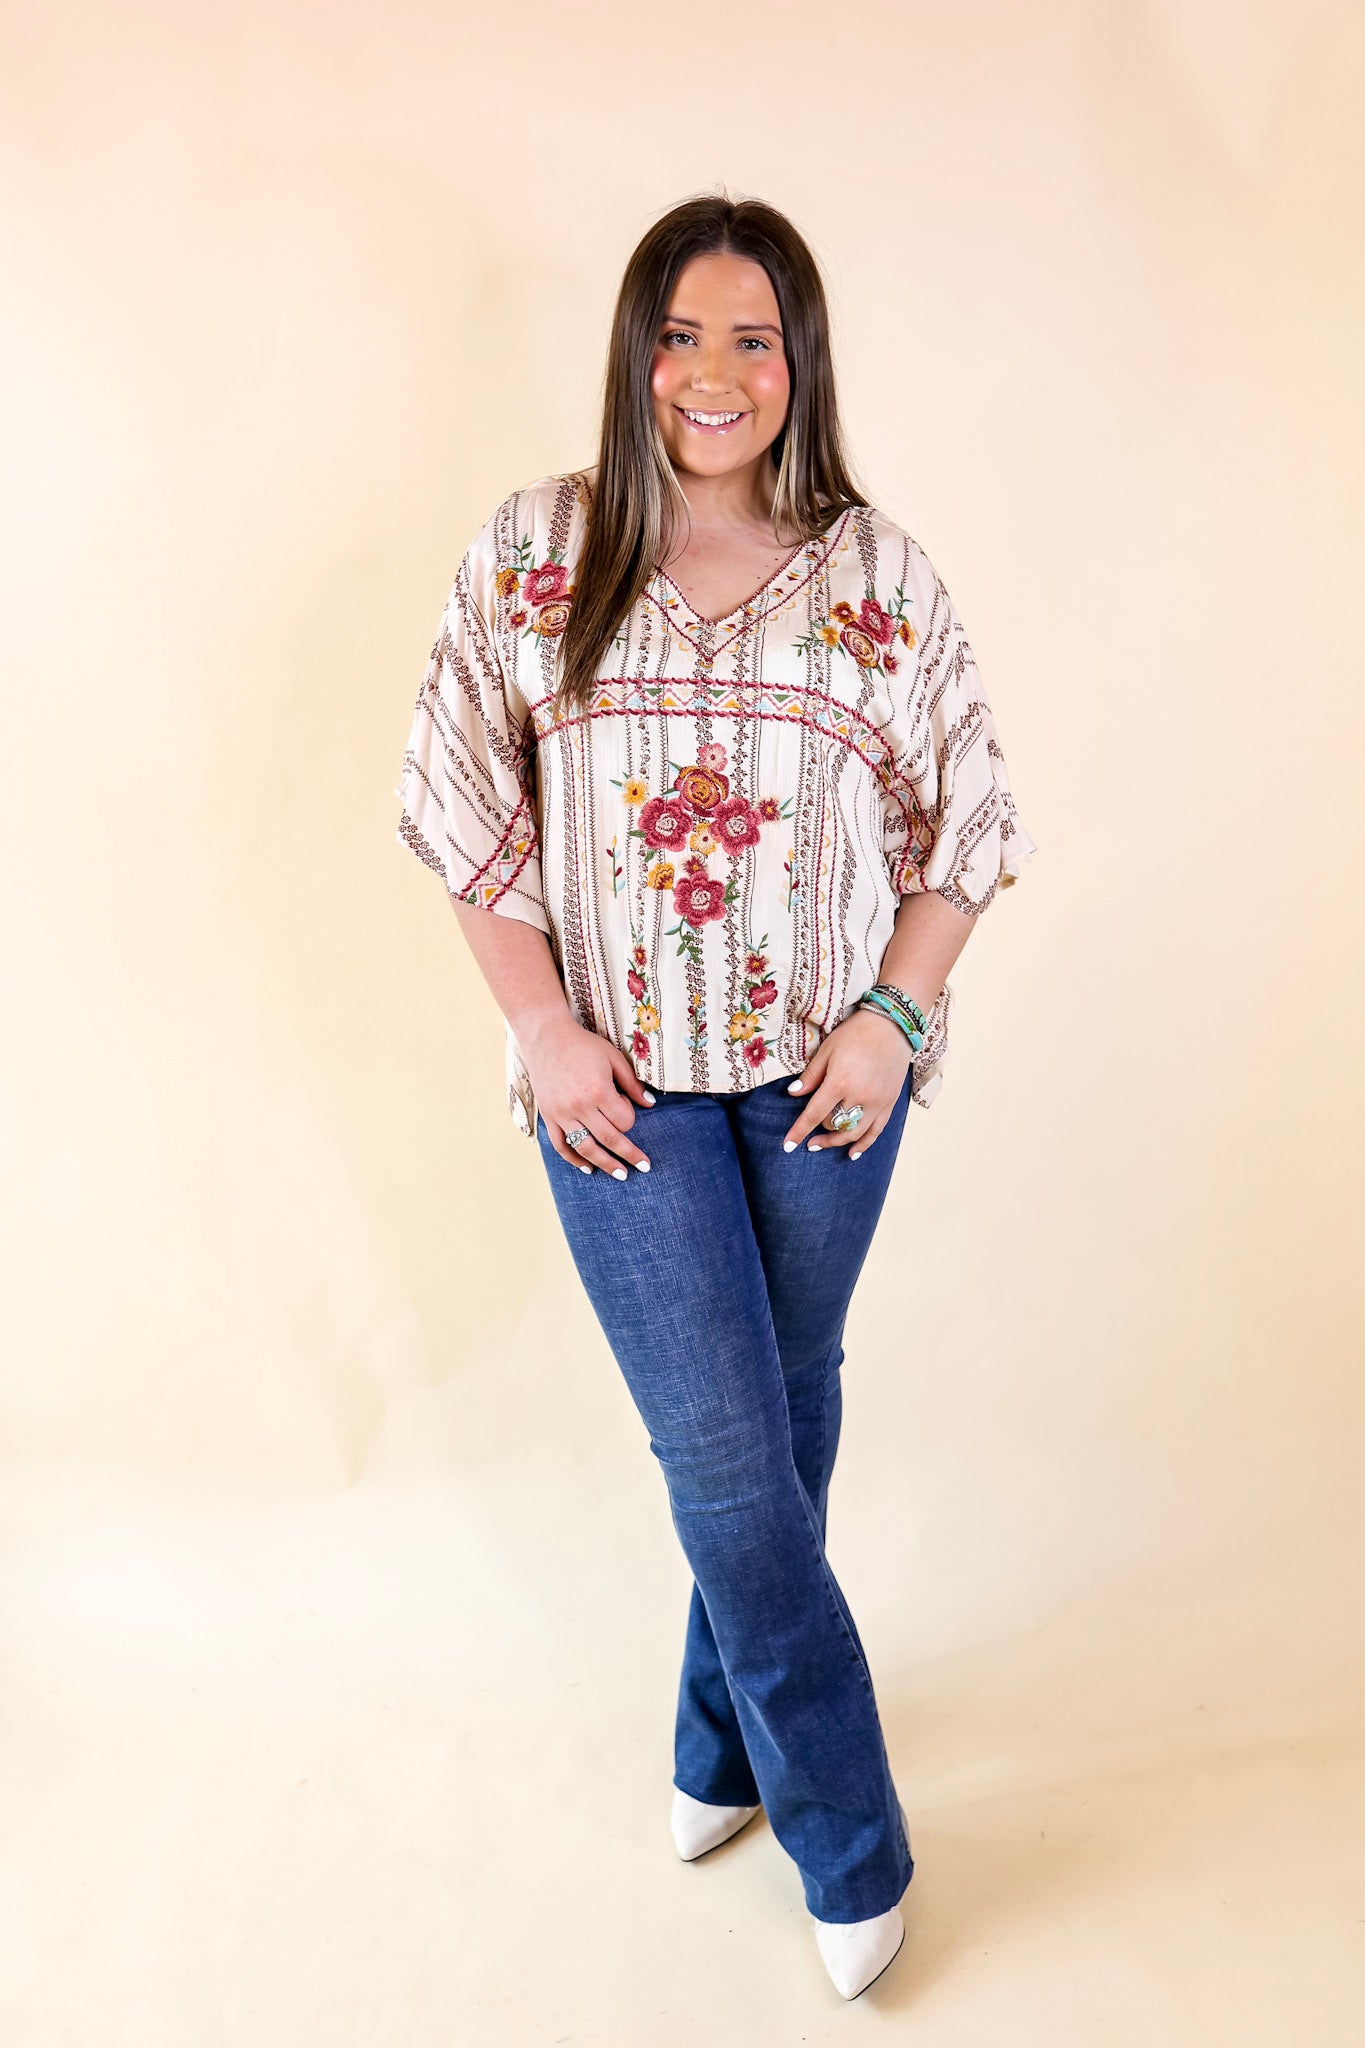 On A High Note Embroidered Poncho Top with V Neck in Ivory